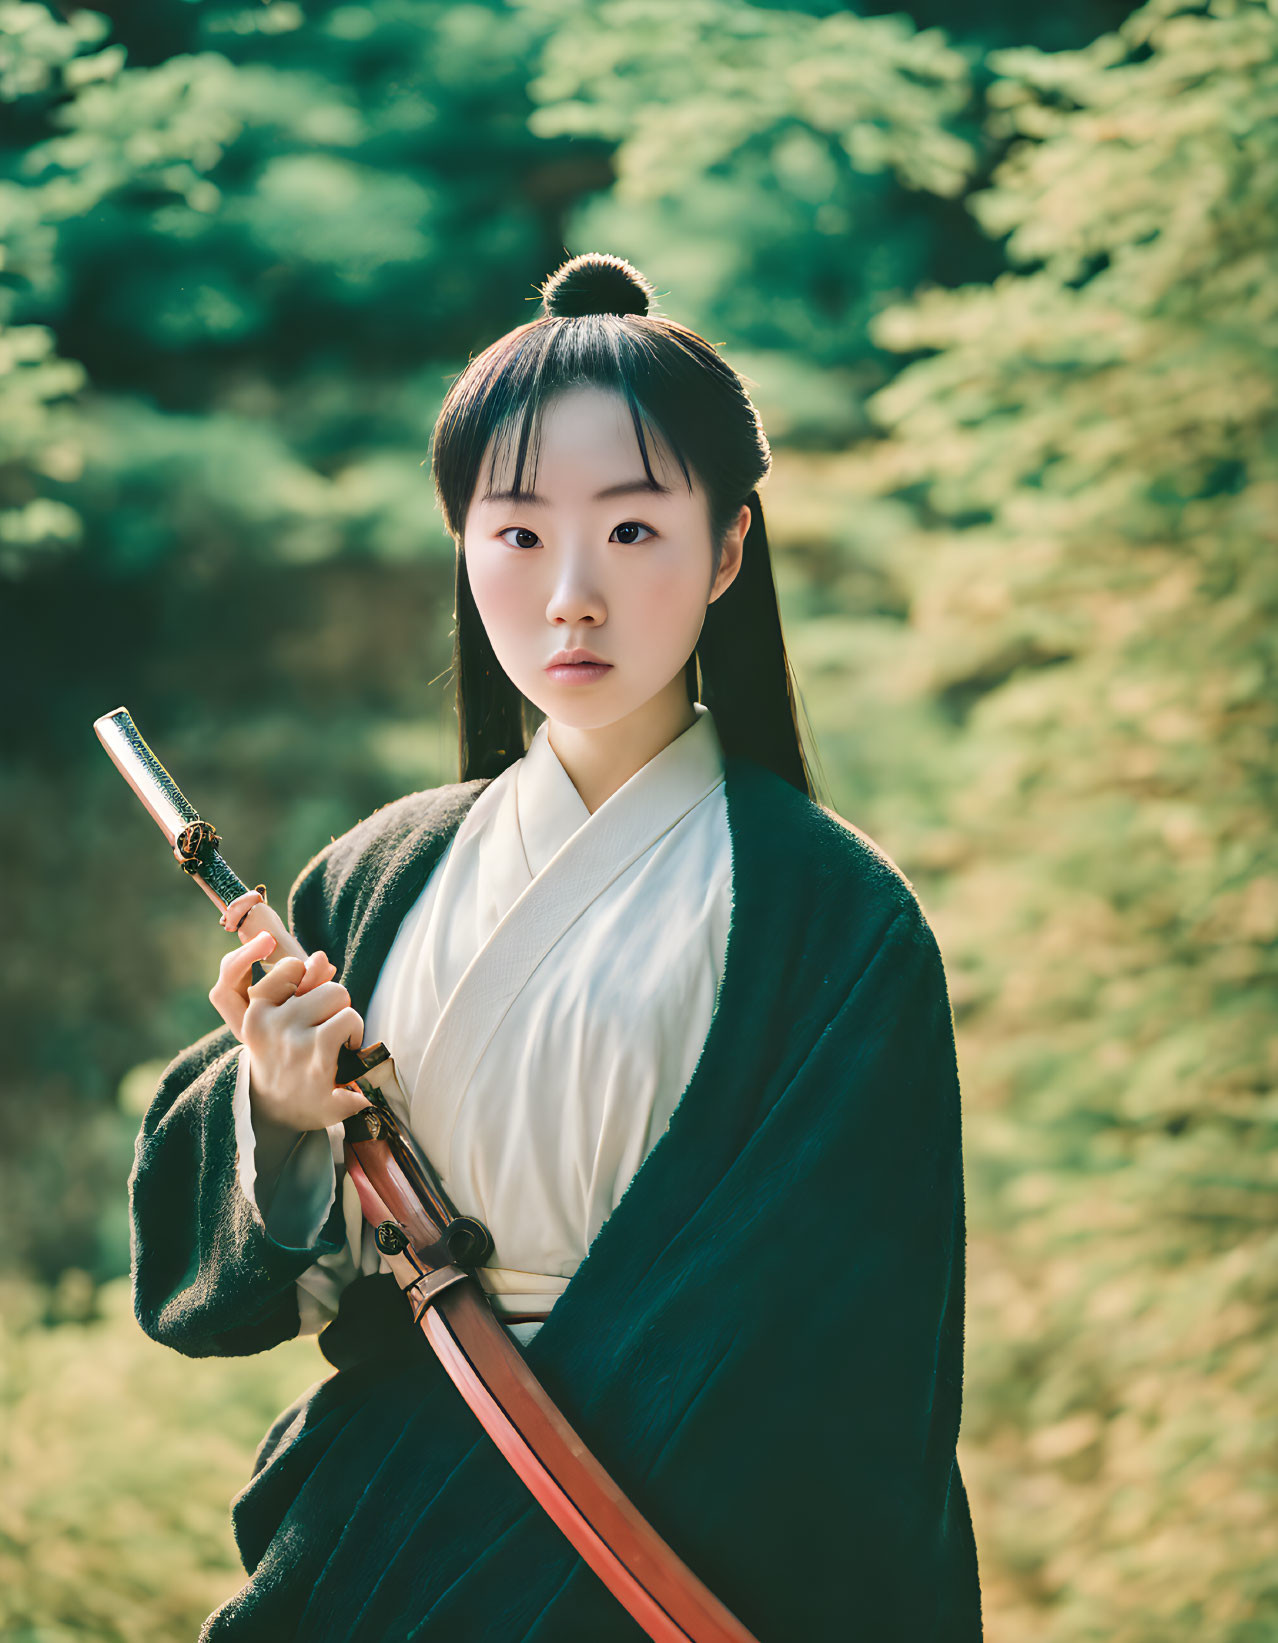 Traditional East Asian Attire Woman Holding Sword in Green Background